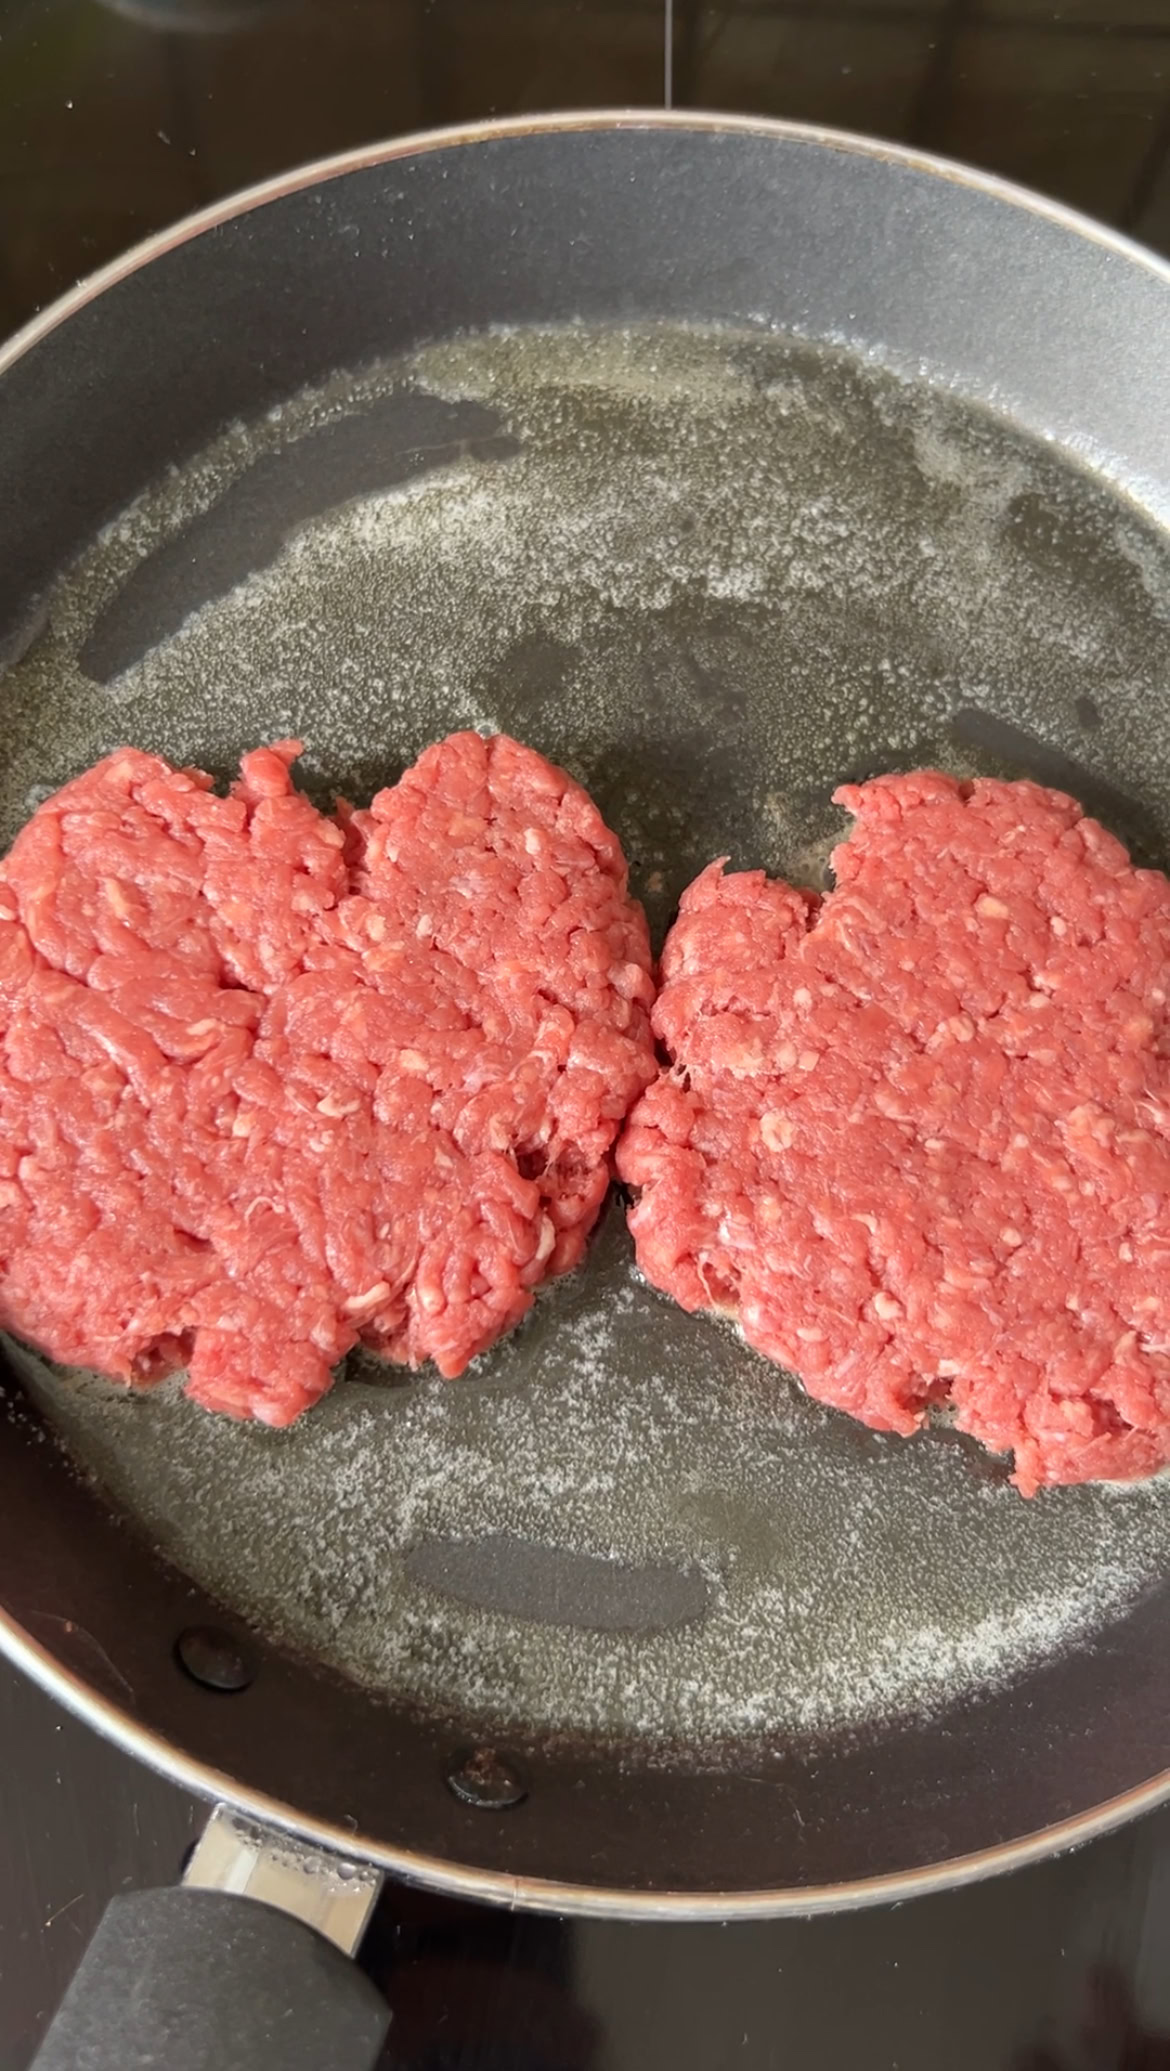 Two pieces of minced meat cooking in the black pan with melted butter.